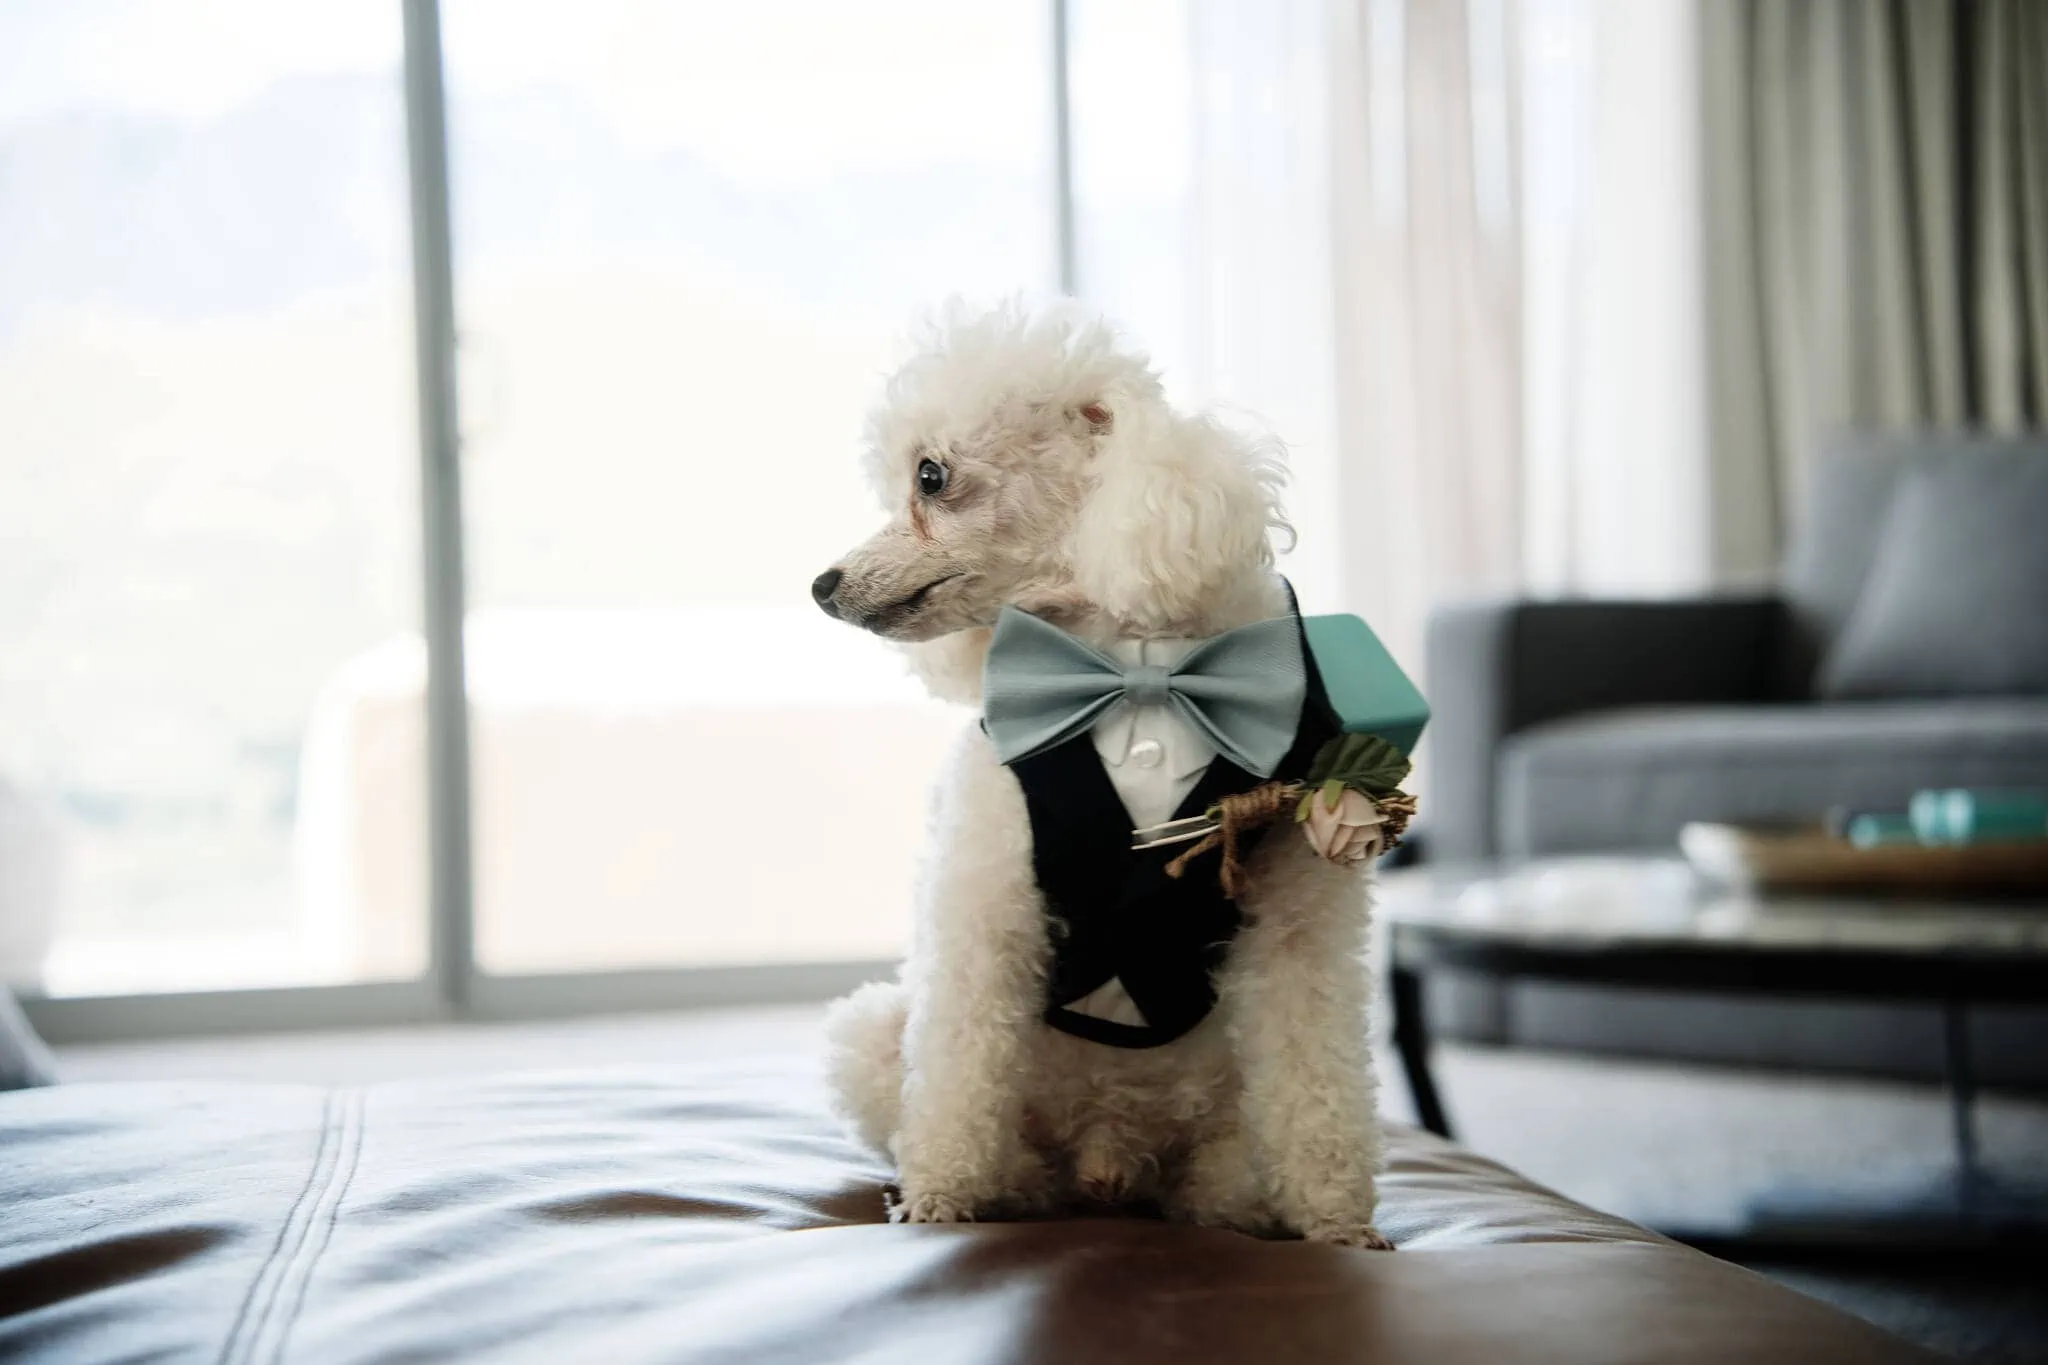 Carlos and Wanzhu's poodle wearing a bow tie sitting on a couch during an intimate Cecil Peak Heli Elopement Wedding.